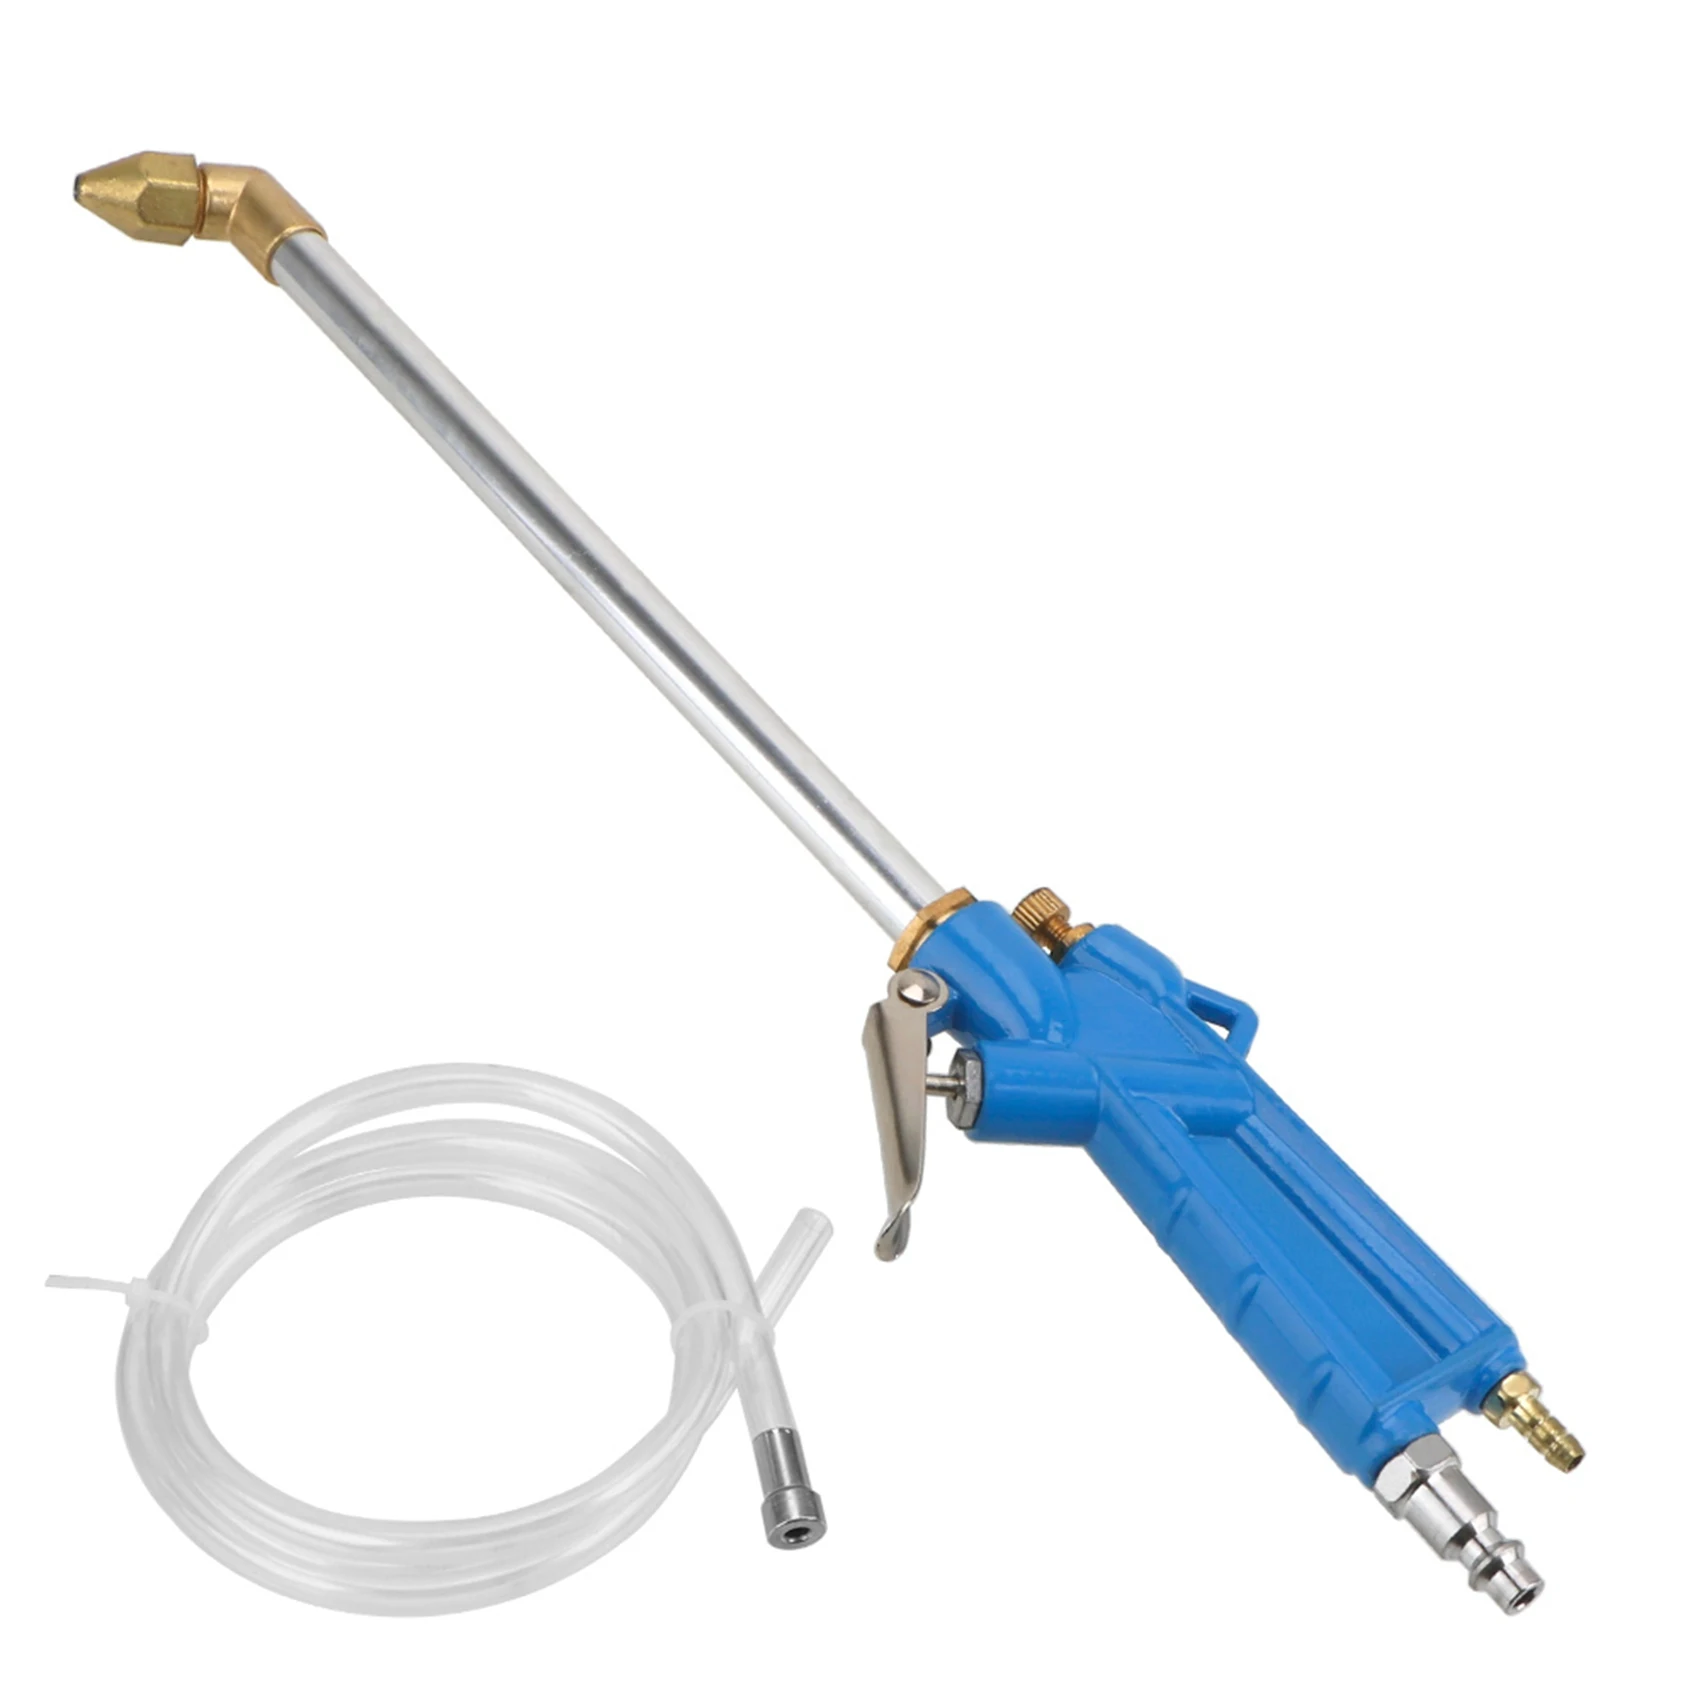 

USA Type Engine Water-Gun Pneumatic Cleaning Tool Car Engine Oil Cleaner Tool 40cm High Press Pneumatic Water Nozzle